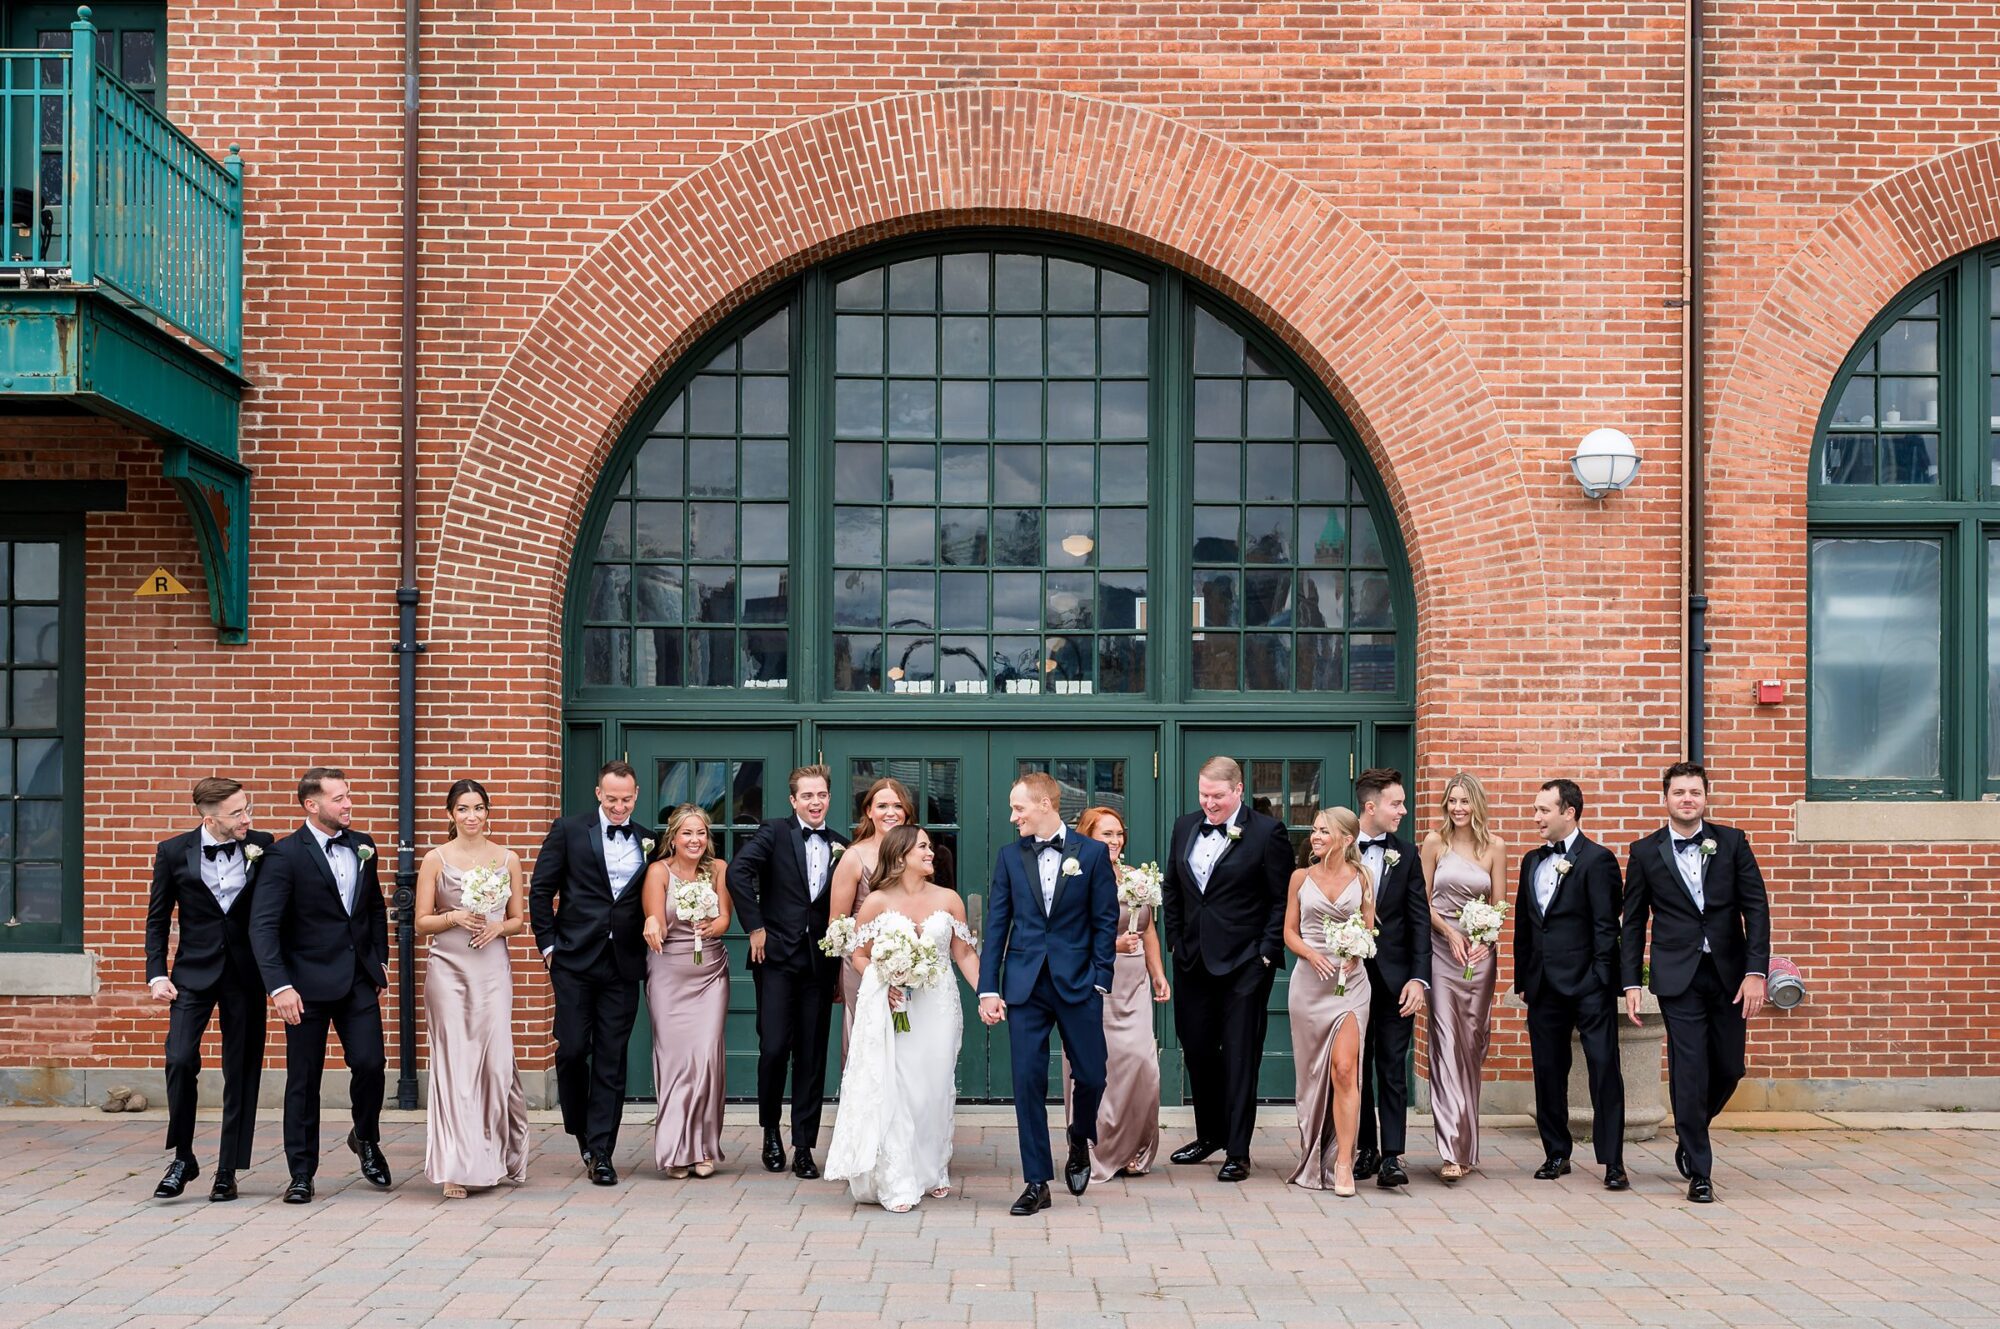 A group of bridesmaids and groomsmen pose in front of a brick building.